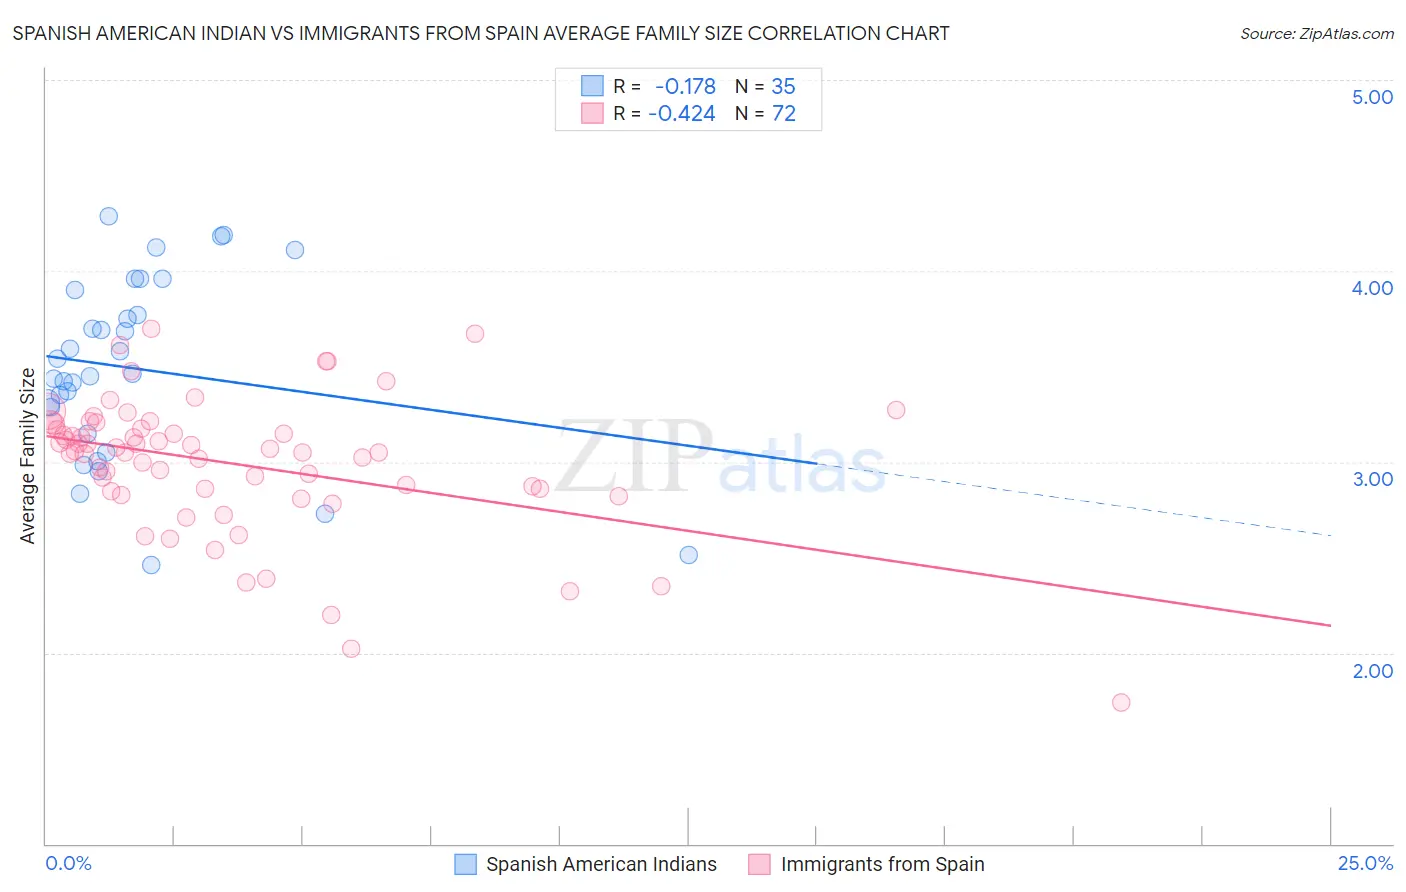 Spanish American Indian vs Immigrants from Spain Average Family Size